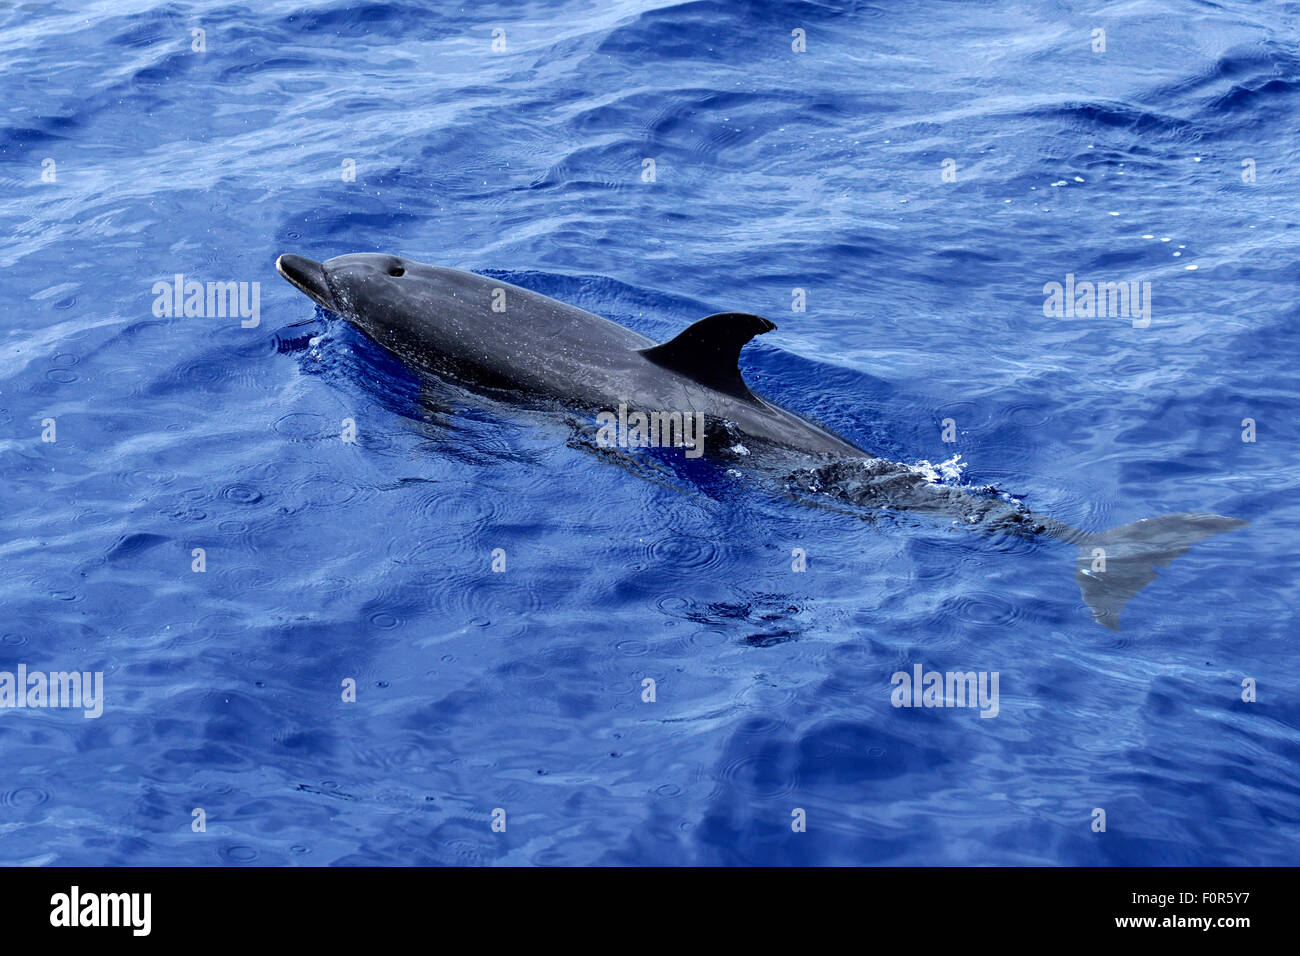 Atlantic spotted dolphin (Stenella frontalis), swimming in the Atlantic Ocean, Funchal, Madeira, Portugal Stock Photo